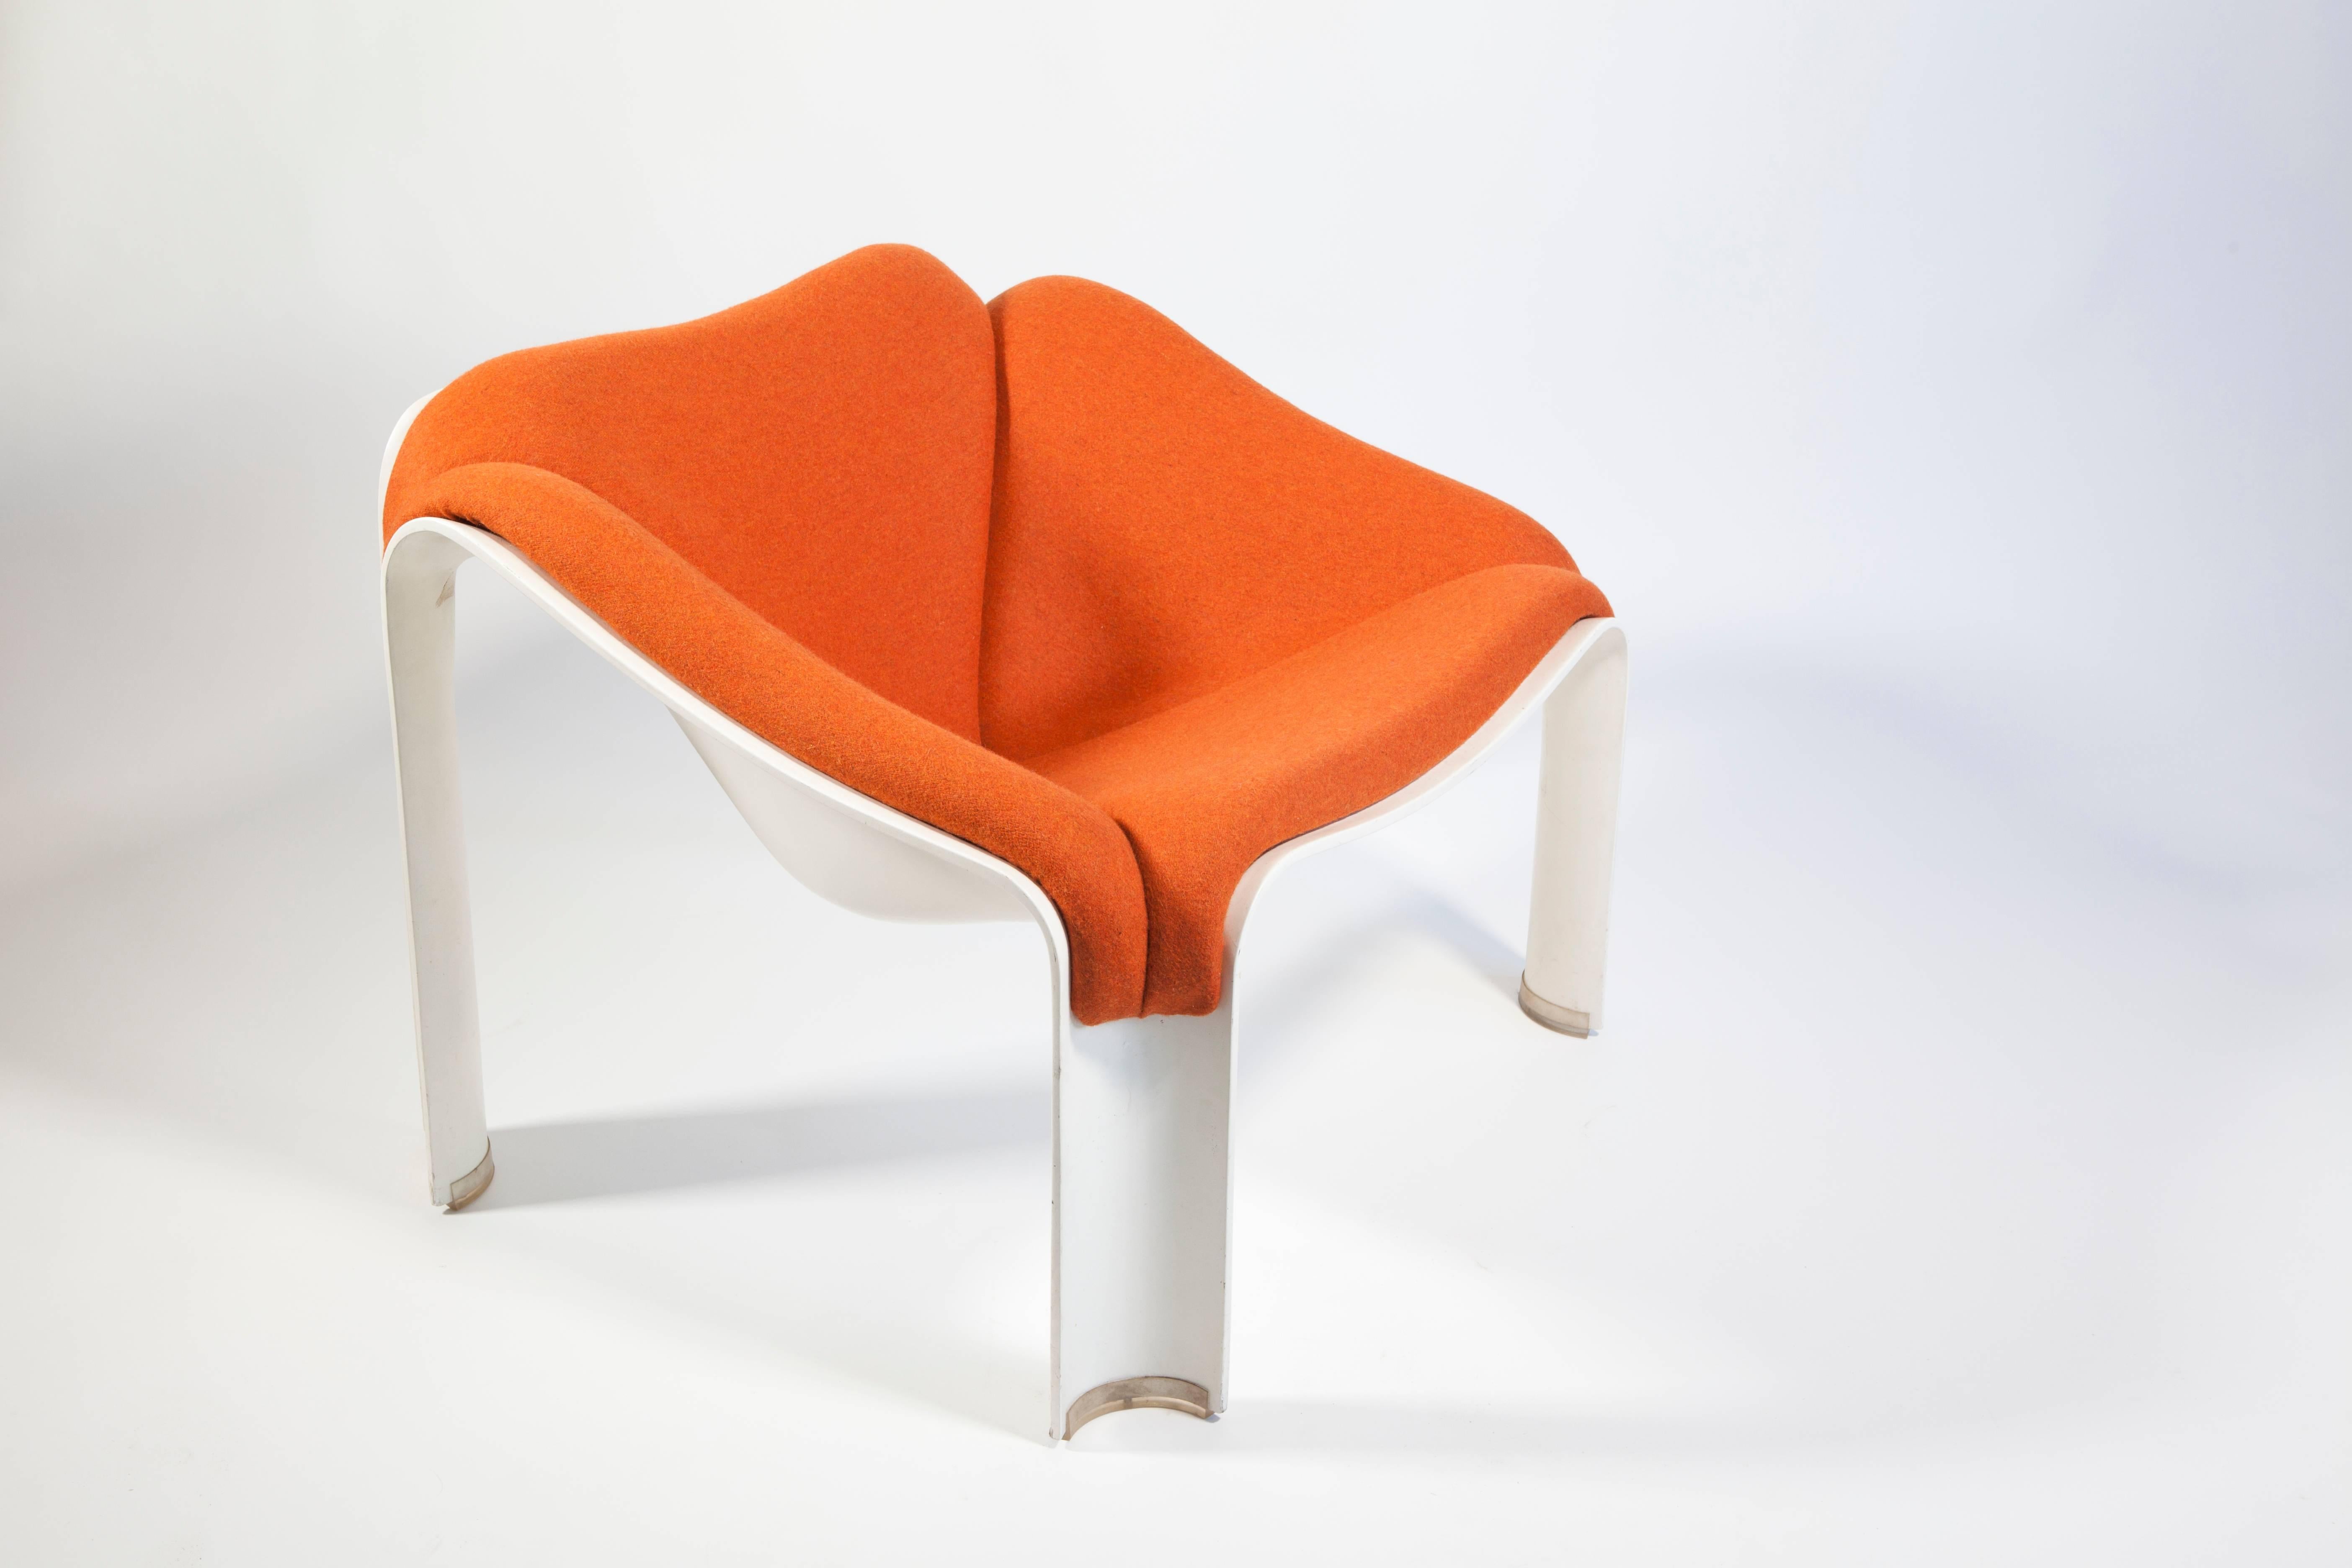 Beautiful lounge chair designed by Pierre Paulin for Artifort in 1967. The model is F303. The chair is marked 'Artifort 303 Pierre Paulin'.

Pierre Paulin was a freelance designer for Artifort. They had a long and fruitful collaboration. What makes